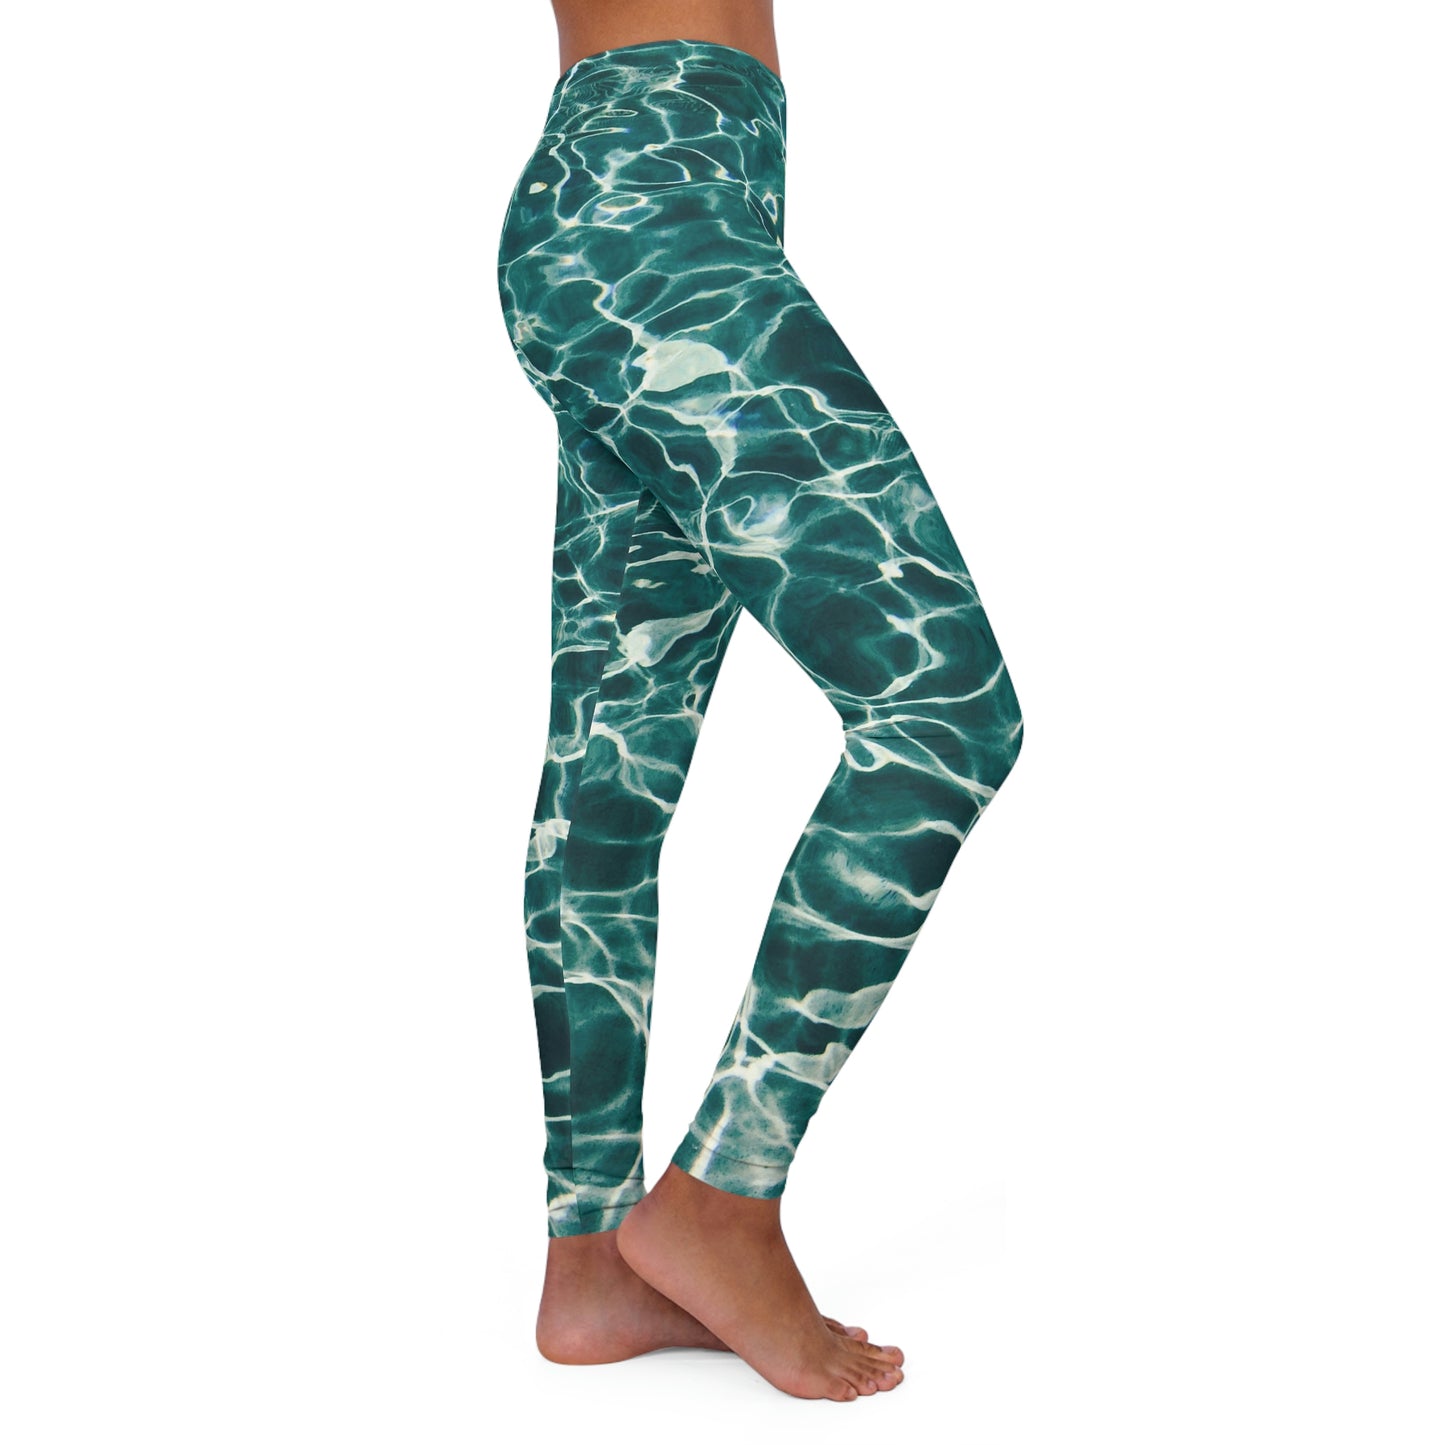 Beach Ocean Viking Pants Cute Women Leggings, One of a Kind Gift - Unique Workout Activewear tights for Wife fitness, Mother, Girlfriend Christmas Gift